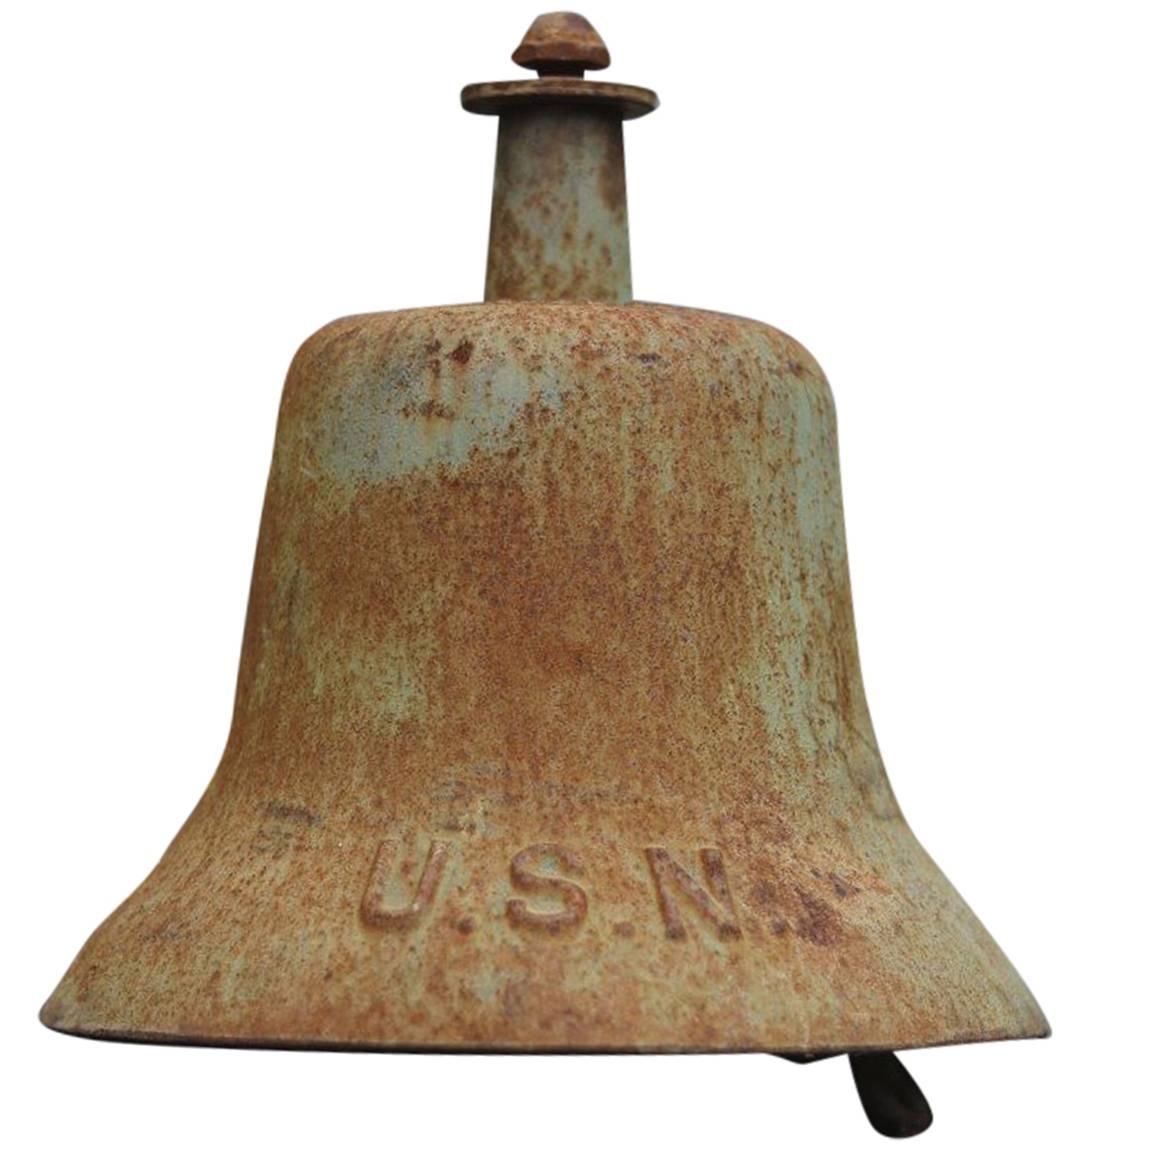 Heavy Ship's Bell by US Navy